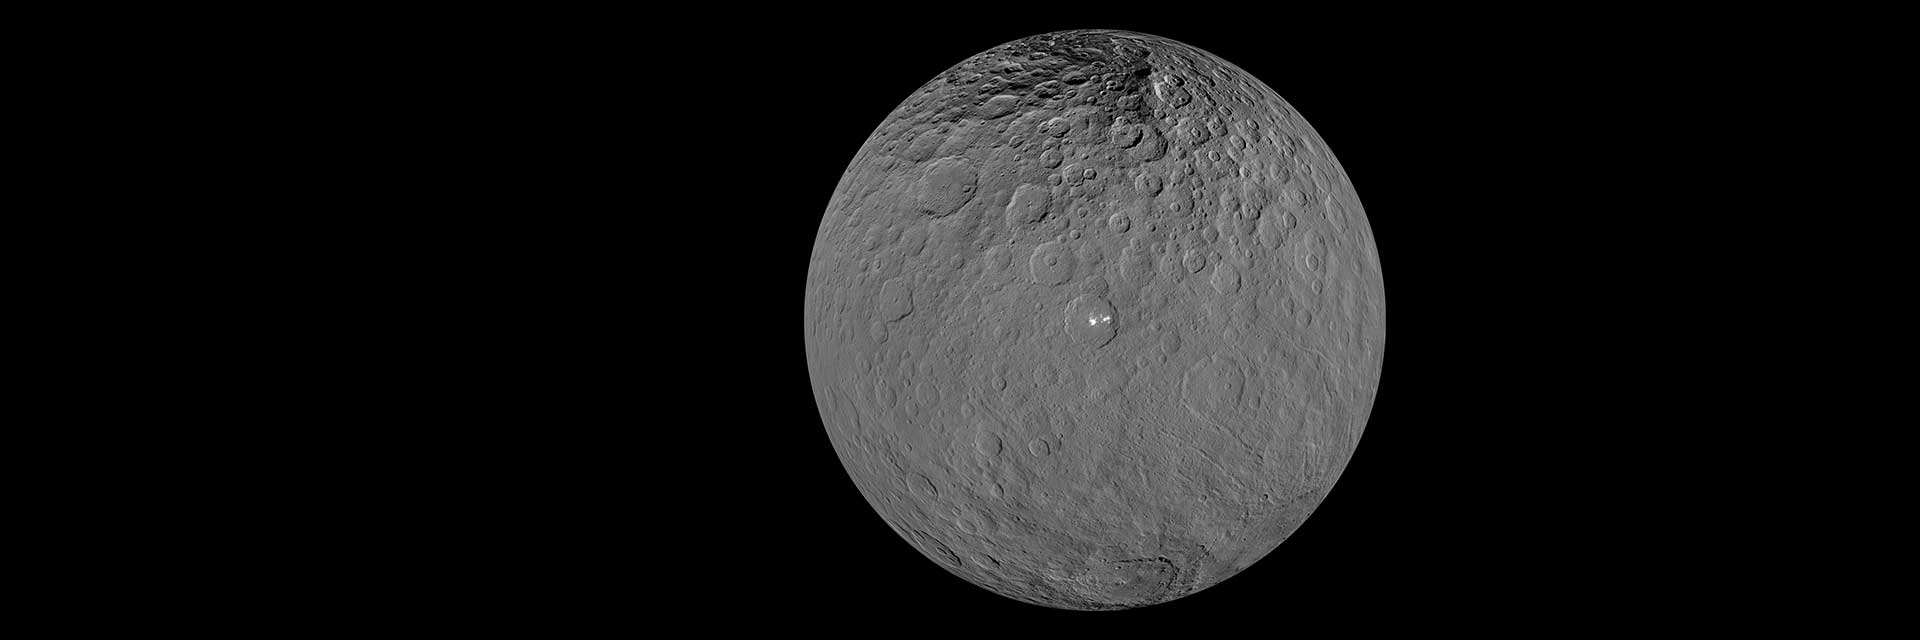 Dwarf planet Ceres appears gray with white splotches in this image from the Dawn spacecraft.